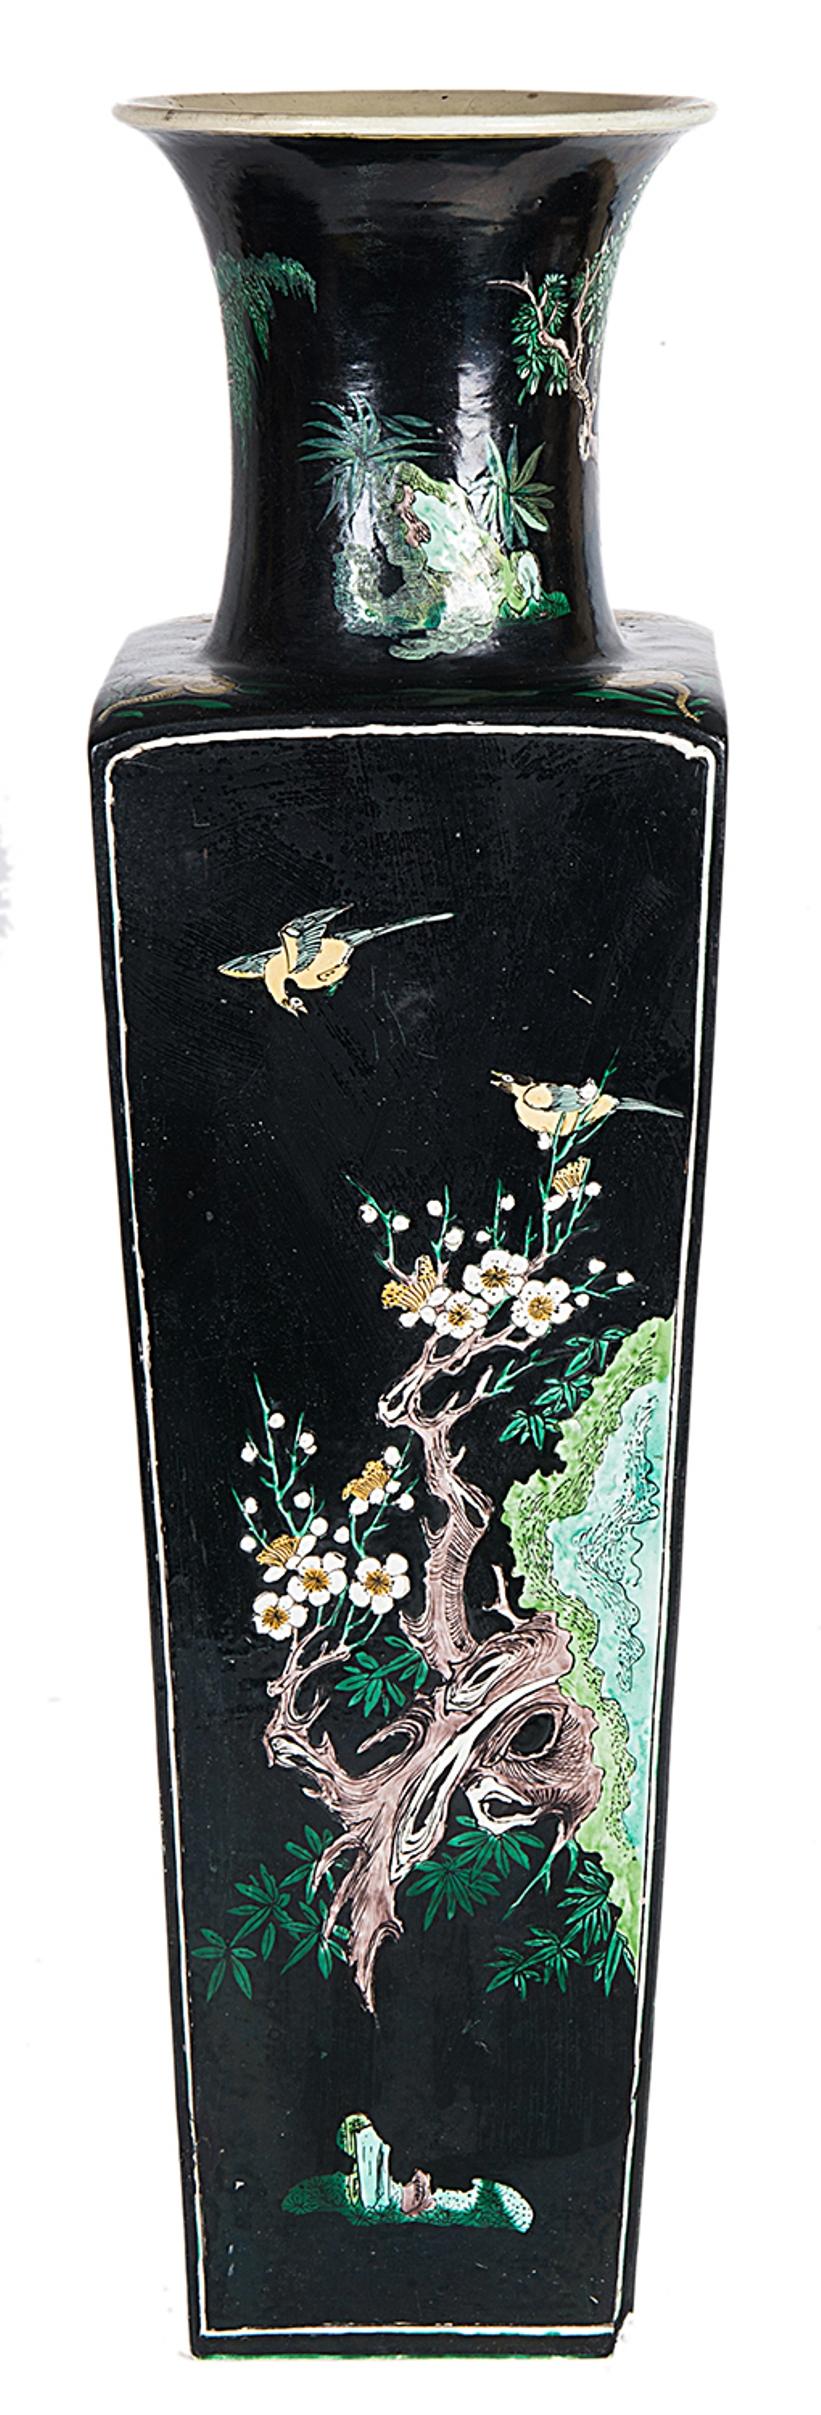 Hand-Painted 19th Century Chinese Famille Noire Vase